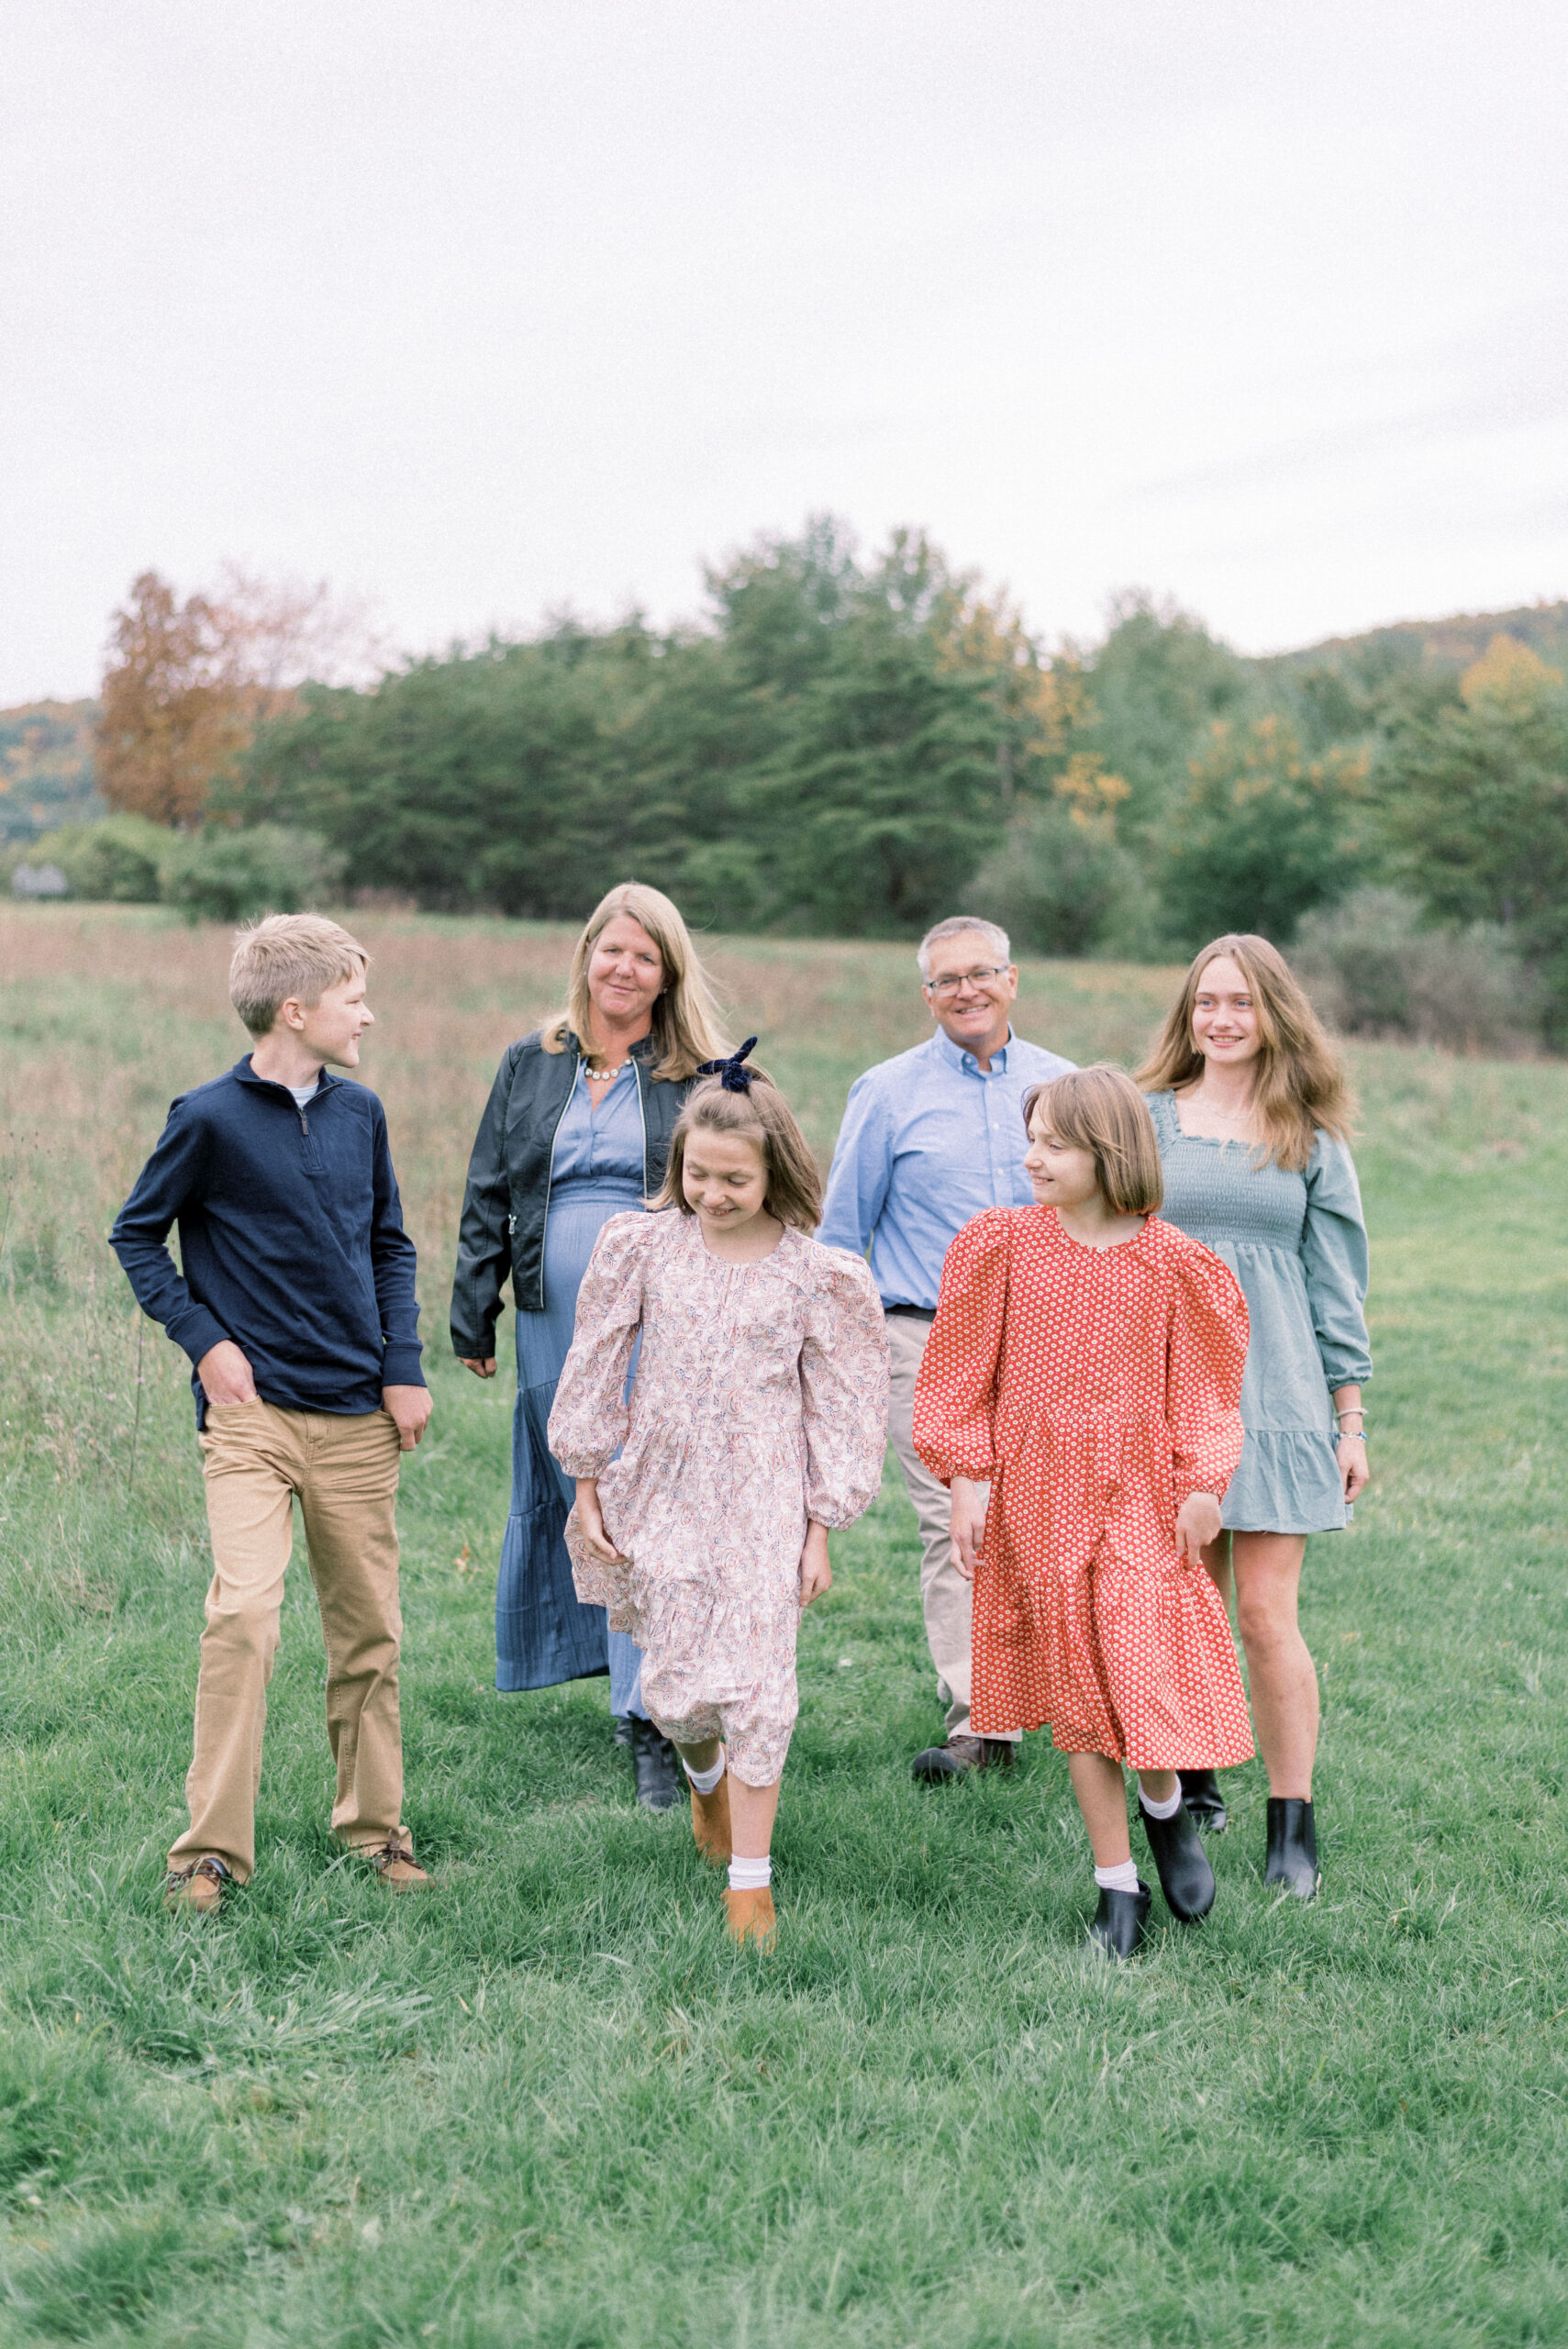 Pennsylvania photographer captures family walking together during portraits